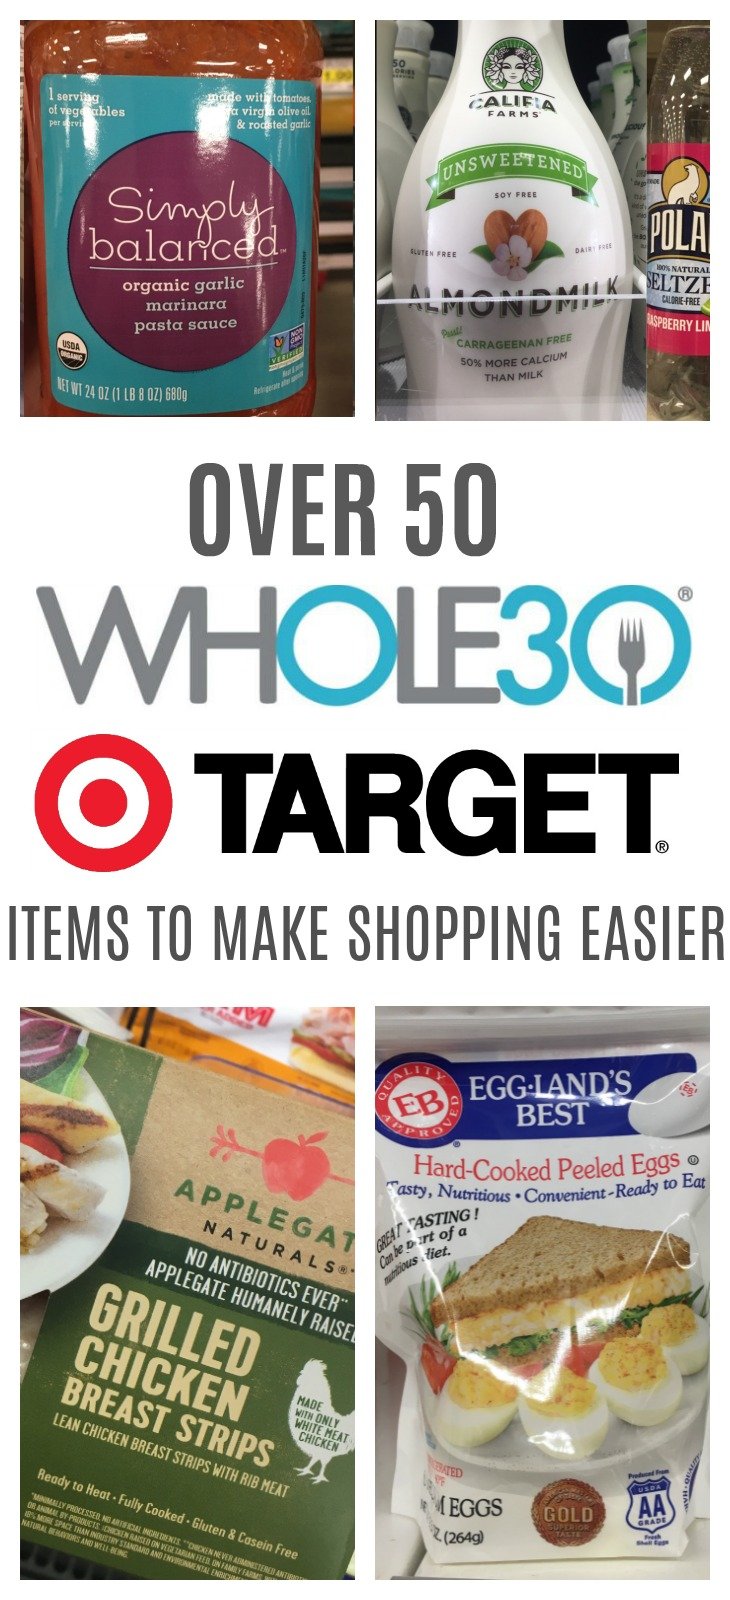 Whole30 just got easier with these Whole30 Target options! From Whole30 meat, healthy fats, compliant milk and emergency foods, grocery shopping for Whole30 will be quick and easy in one store. #whole30target #whole30grocery #whole30tips #targetwhole30